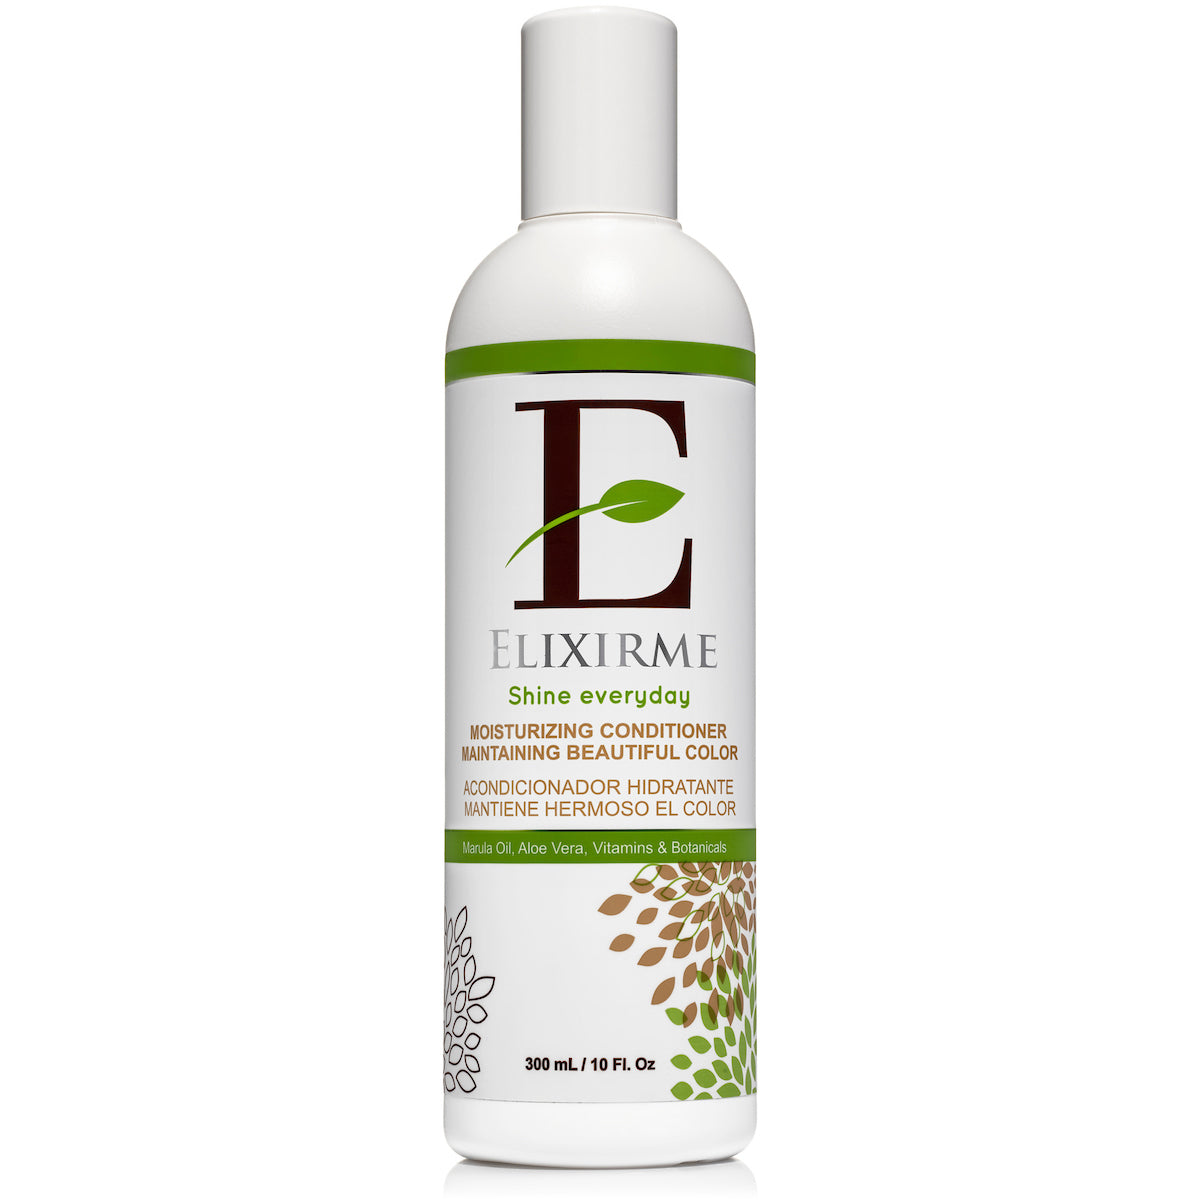 ElixirMe Moisture Repair Shampoo for Dry, Damaged Hair Sulfate-Free.